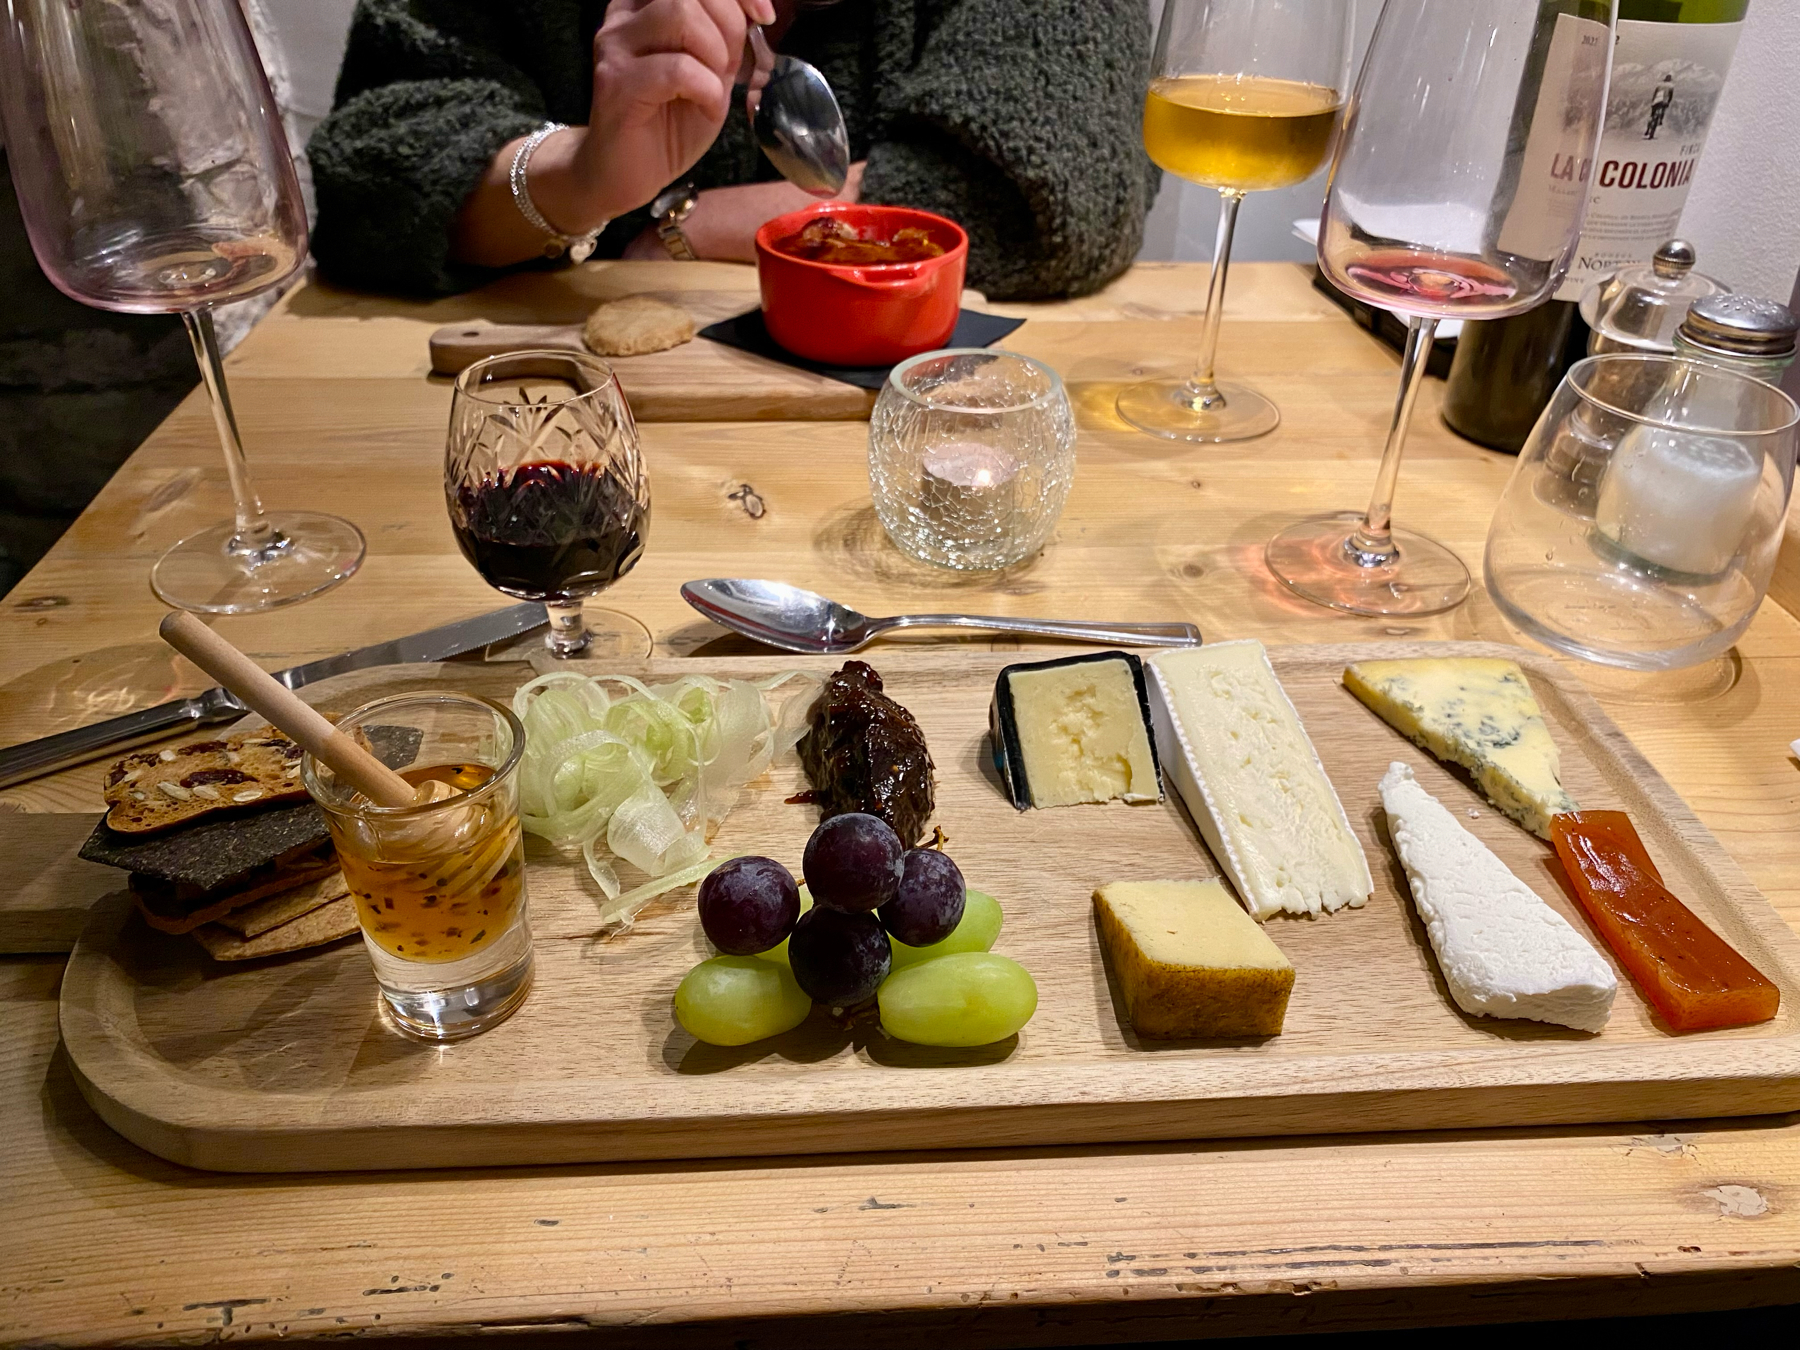 A cheese platter with various cheese types, grapes, crackers, honey, and pickled items, accompanied by glasses of port and dessert wine. A person is dining in the background.